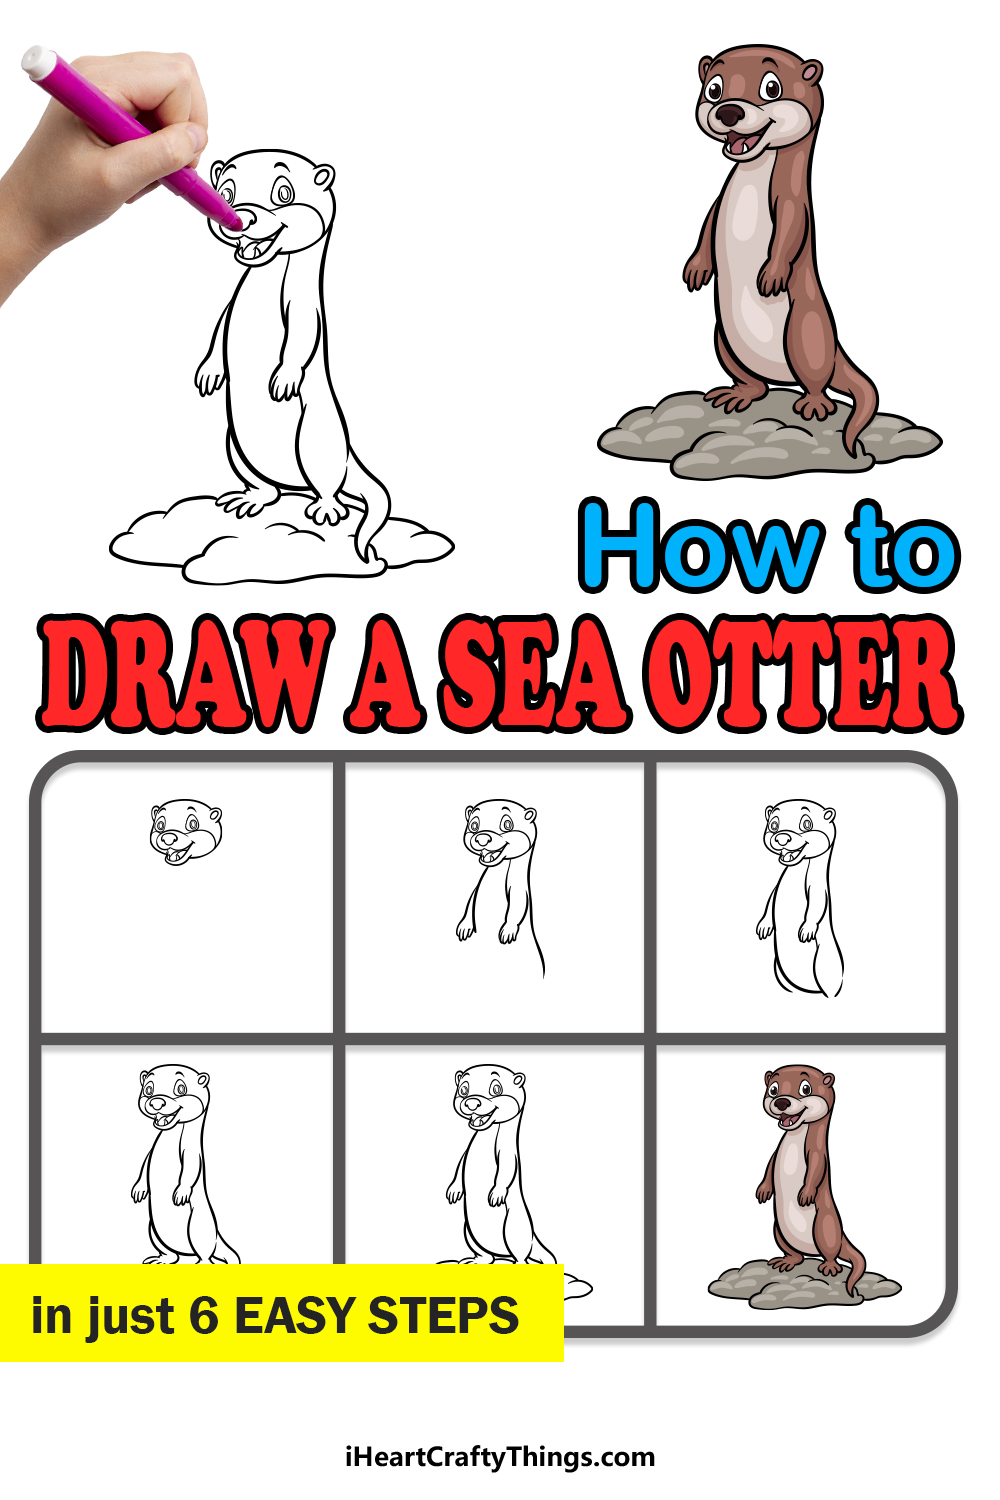 how to draw a Sea Otter in 6 easy steps